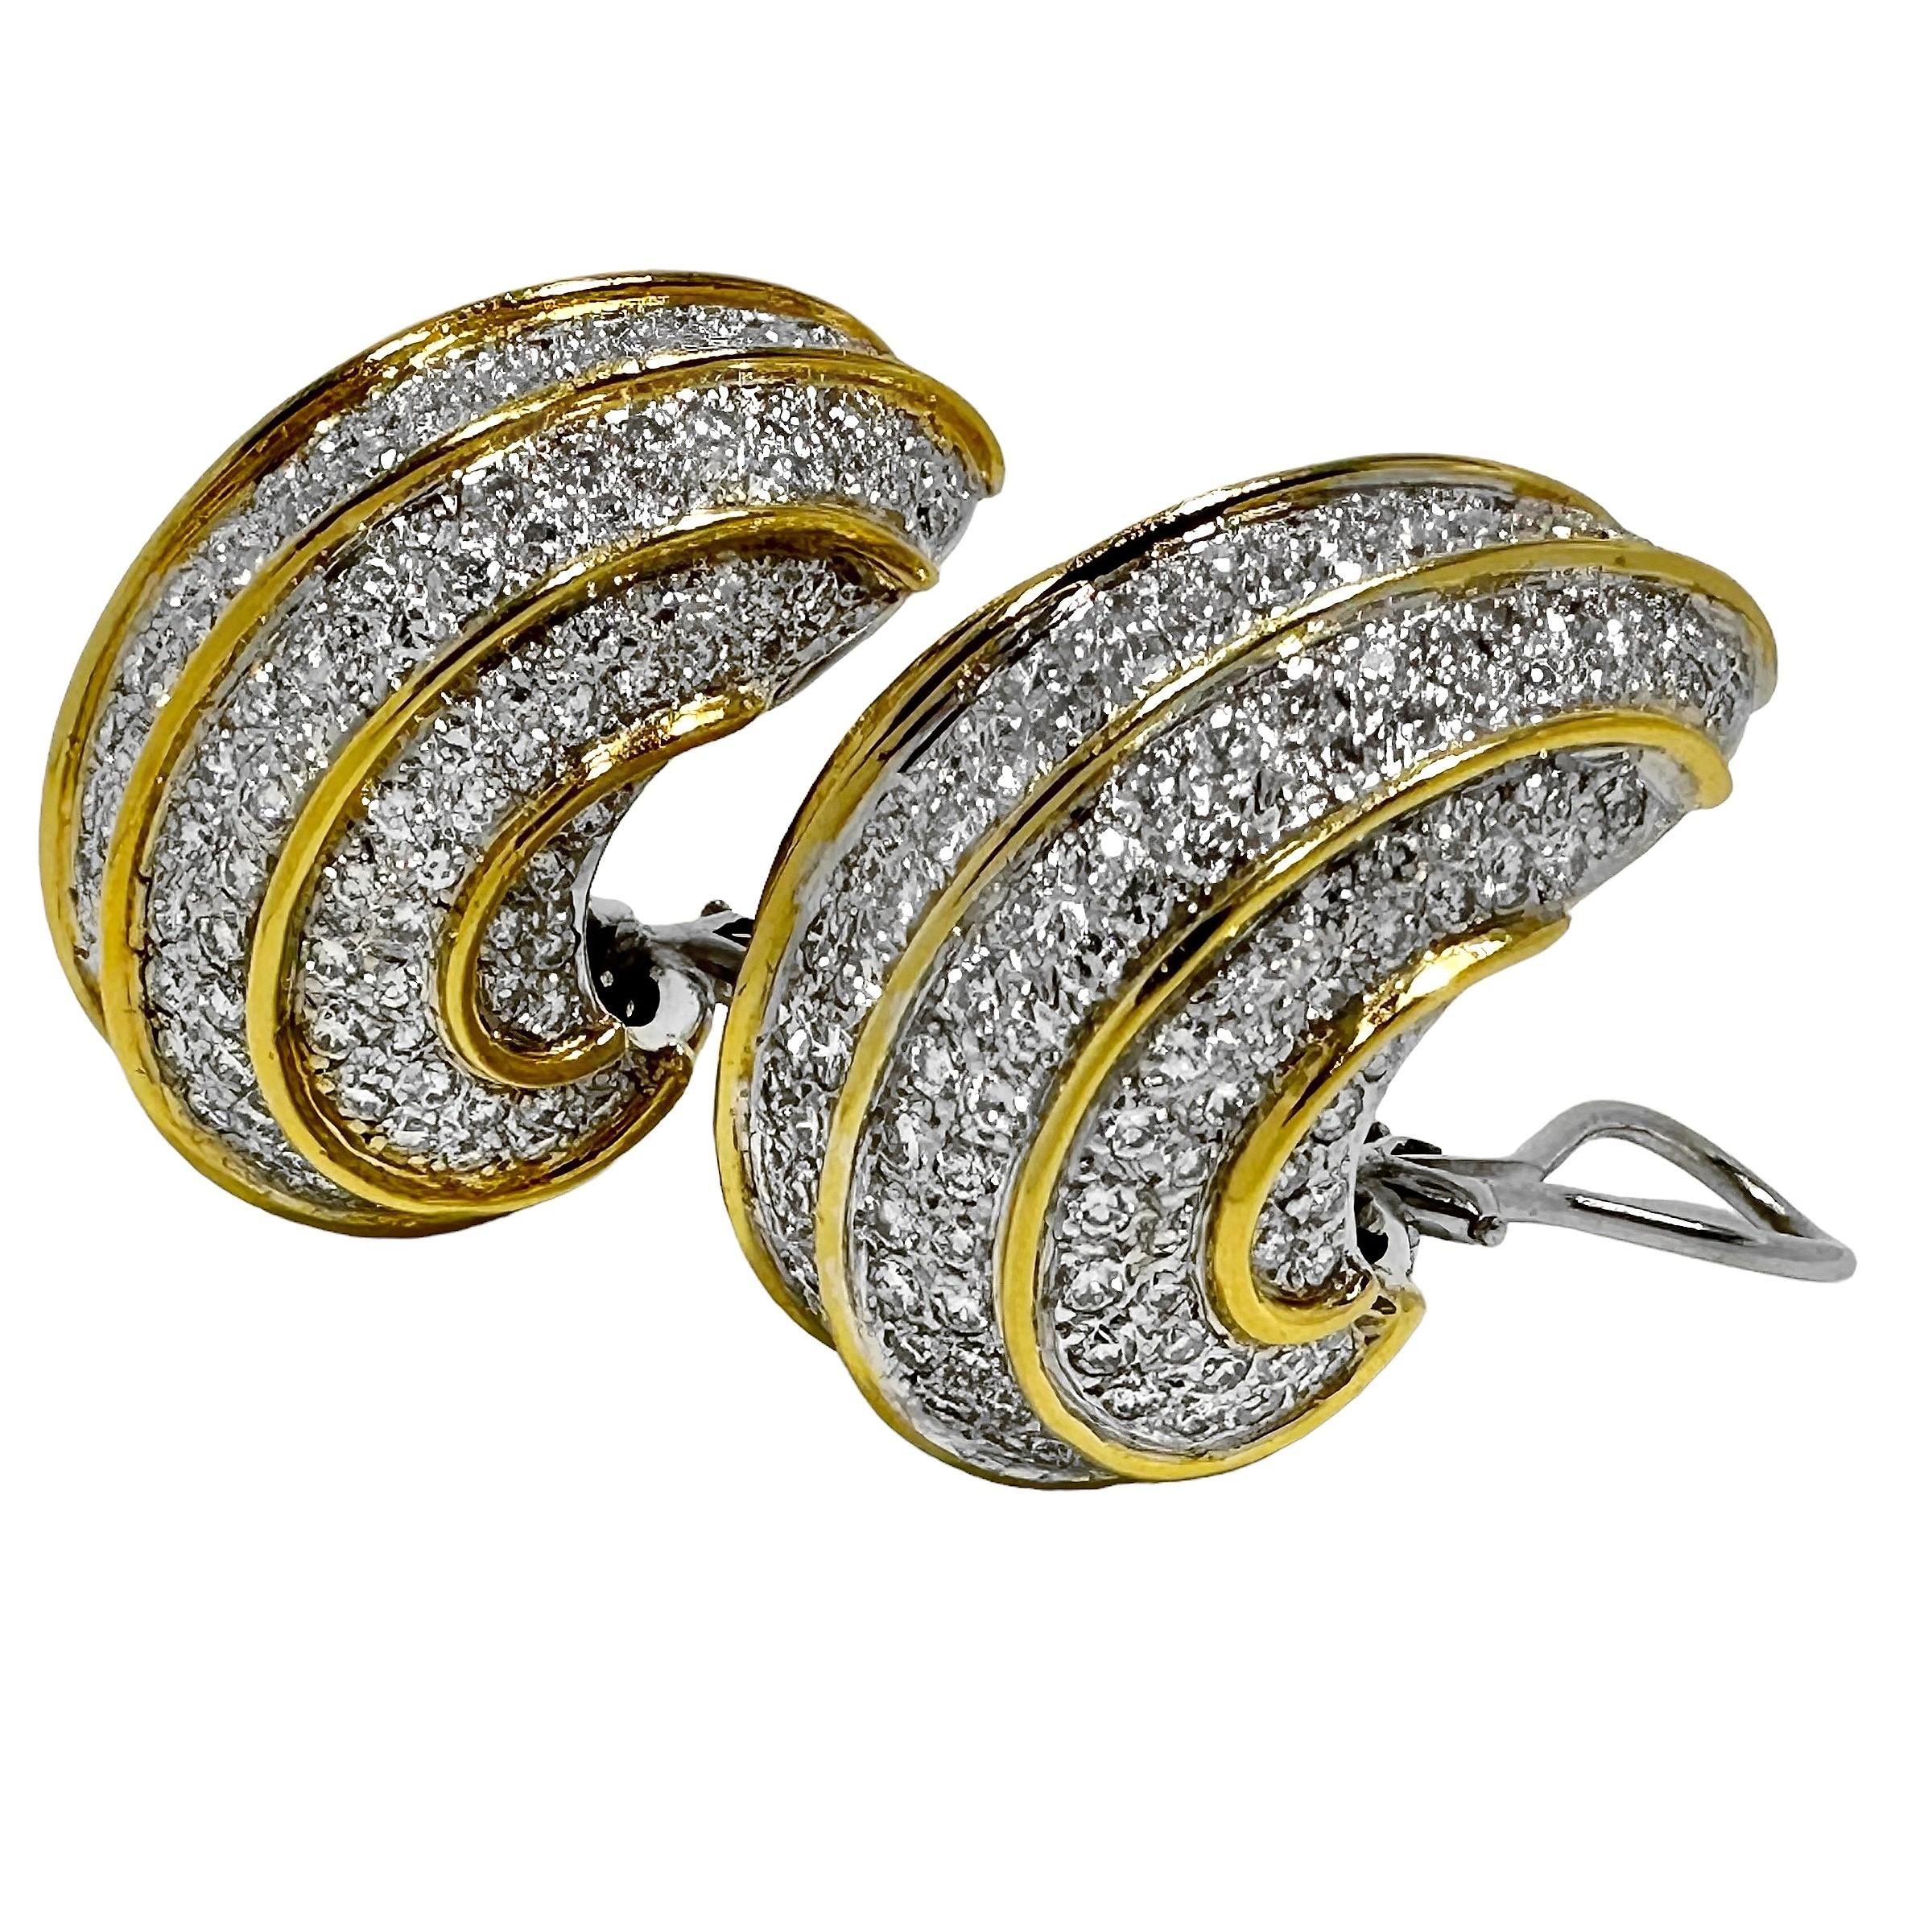 Brilliant Cut 18K White & Yellow Gold Cocktail Earrings with 10Ct Total Approx. Diamond Weight For Sale